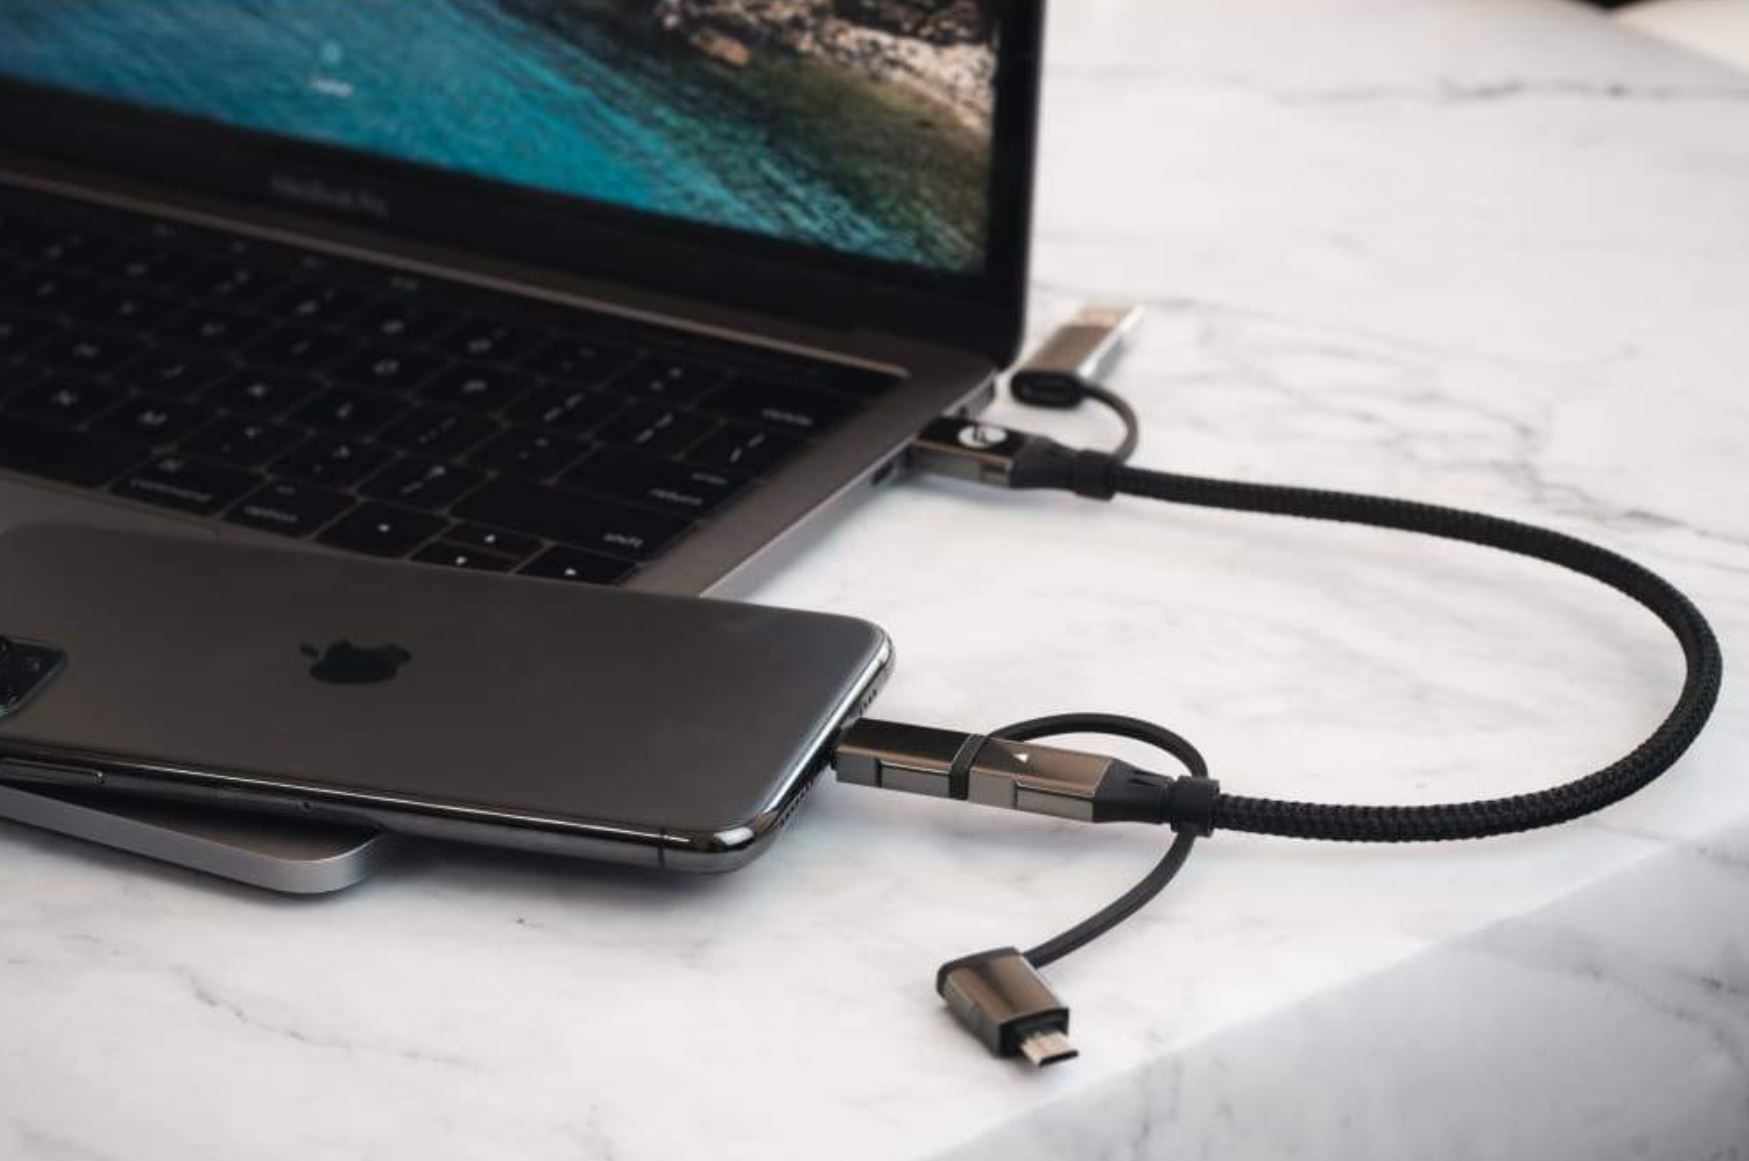 USB and Thunderbolt cables made easy